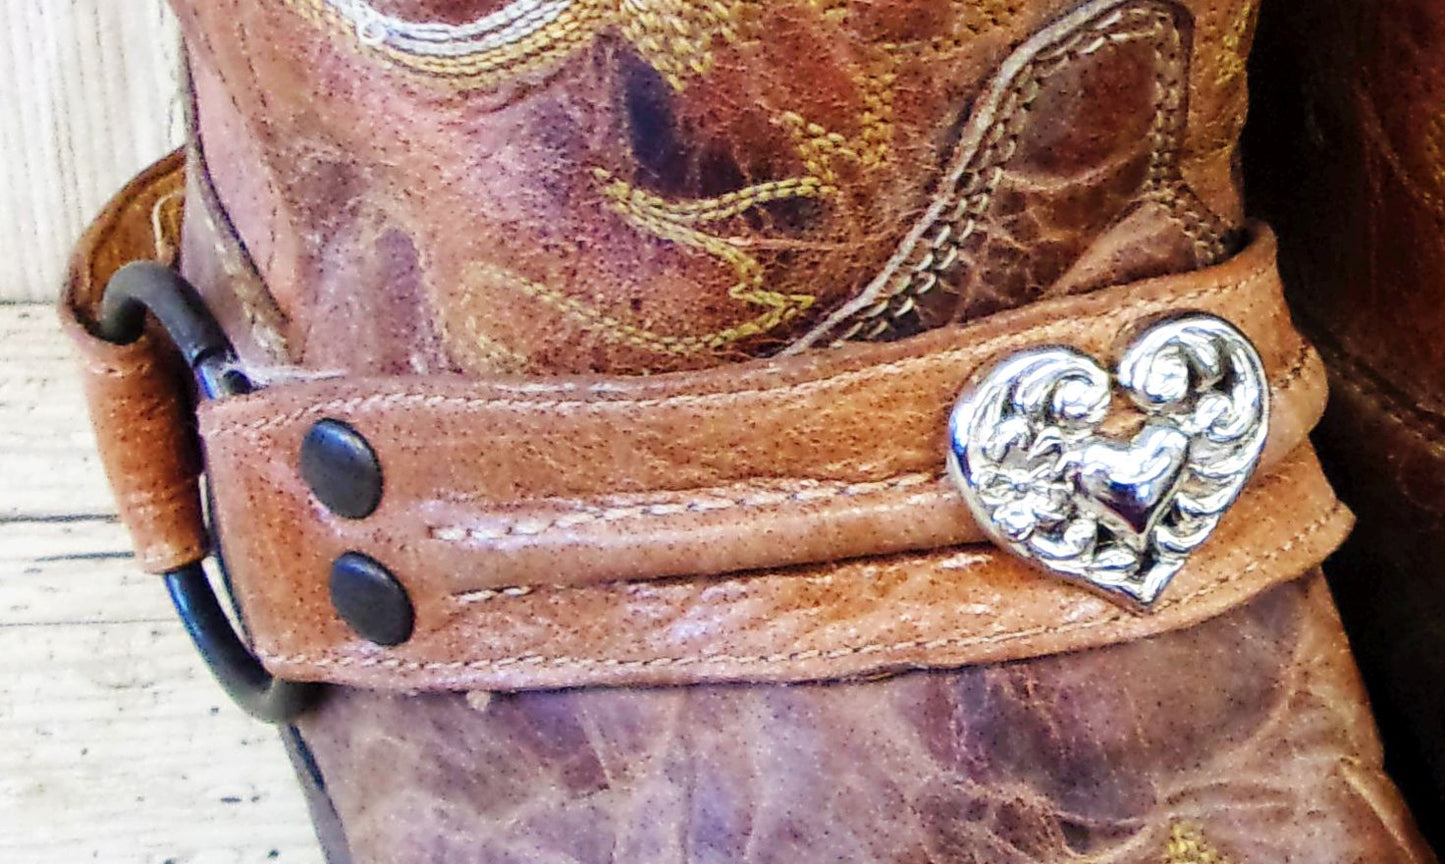 Boot Bracelet Decoration (Single) bw87 handcrafted from cowboy boots. Shop Apparel & Accessories at and buy the best boot accents, boot accessory, boot bling, boot bracelet, boot decor, boot jewelry, boot wrap, cowboy boot bling, cowboy boot decor, cowgirl boot bling, decorate boots, ugg decoration, western boot decor at Chris Thompson Bags.